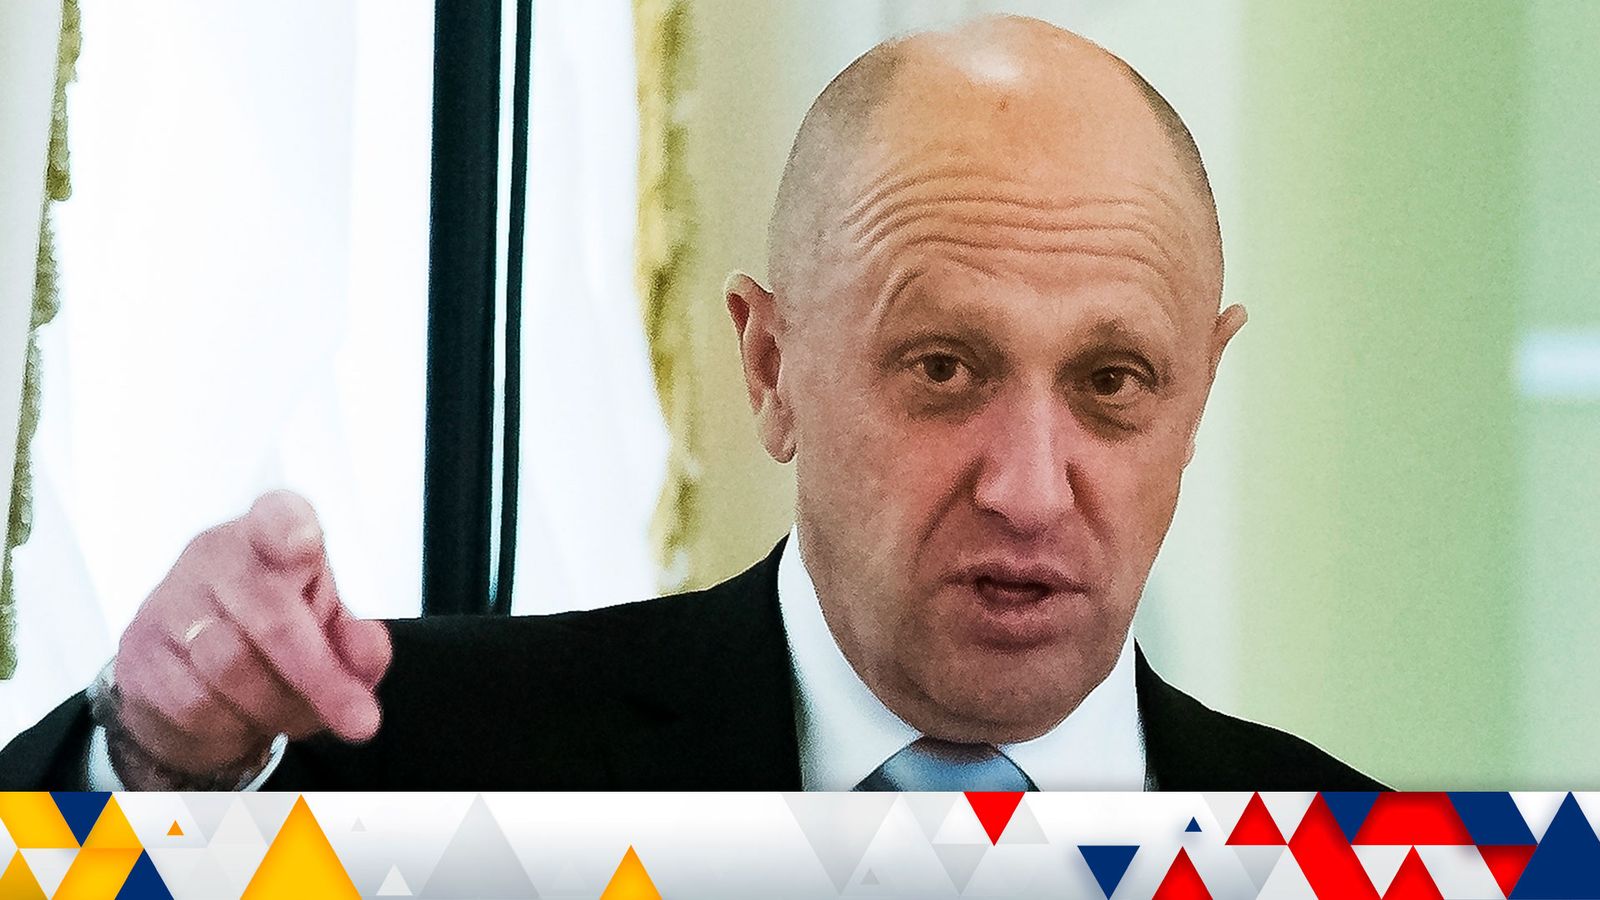 Wagner Group leader Yevgeny Prigozhin appears to laugh off claims of assassination plot | World News